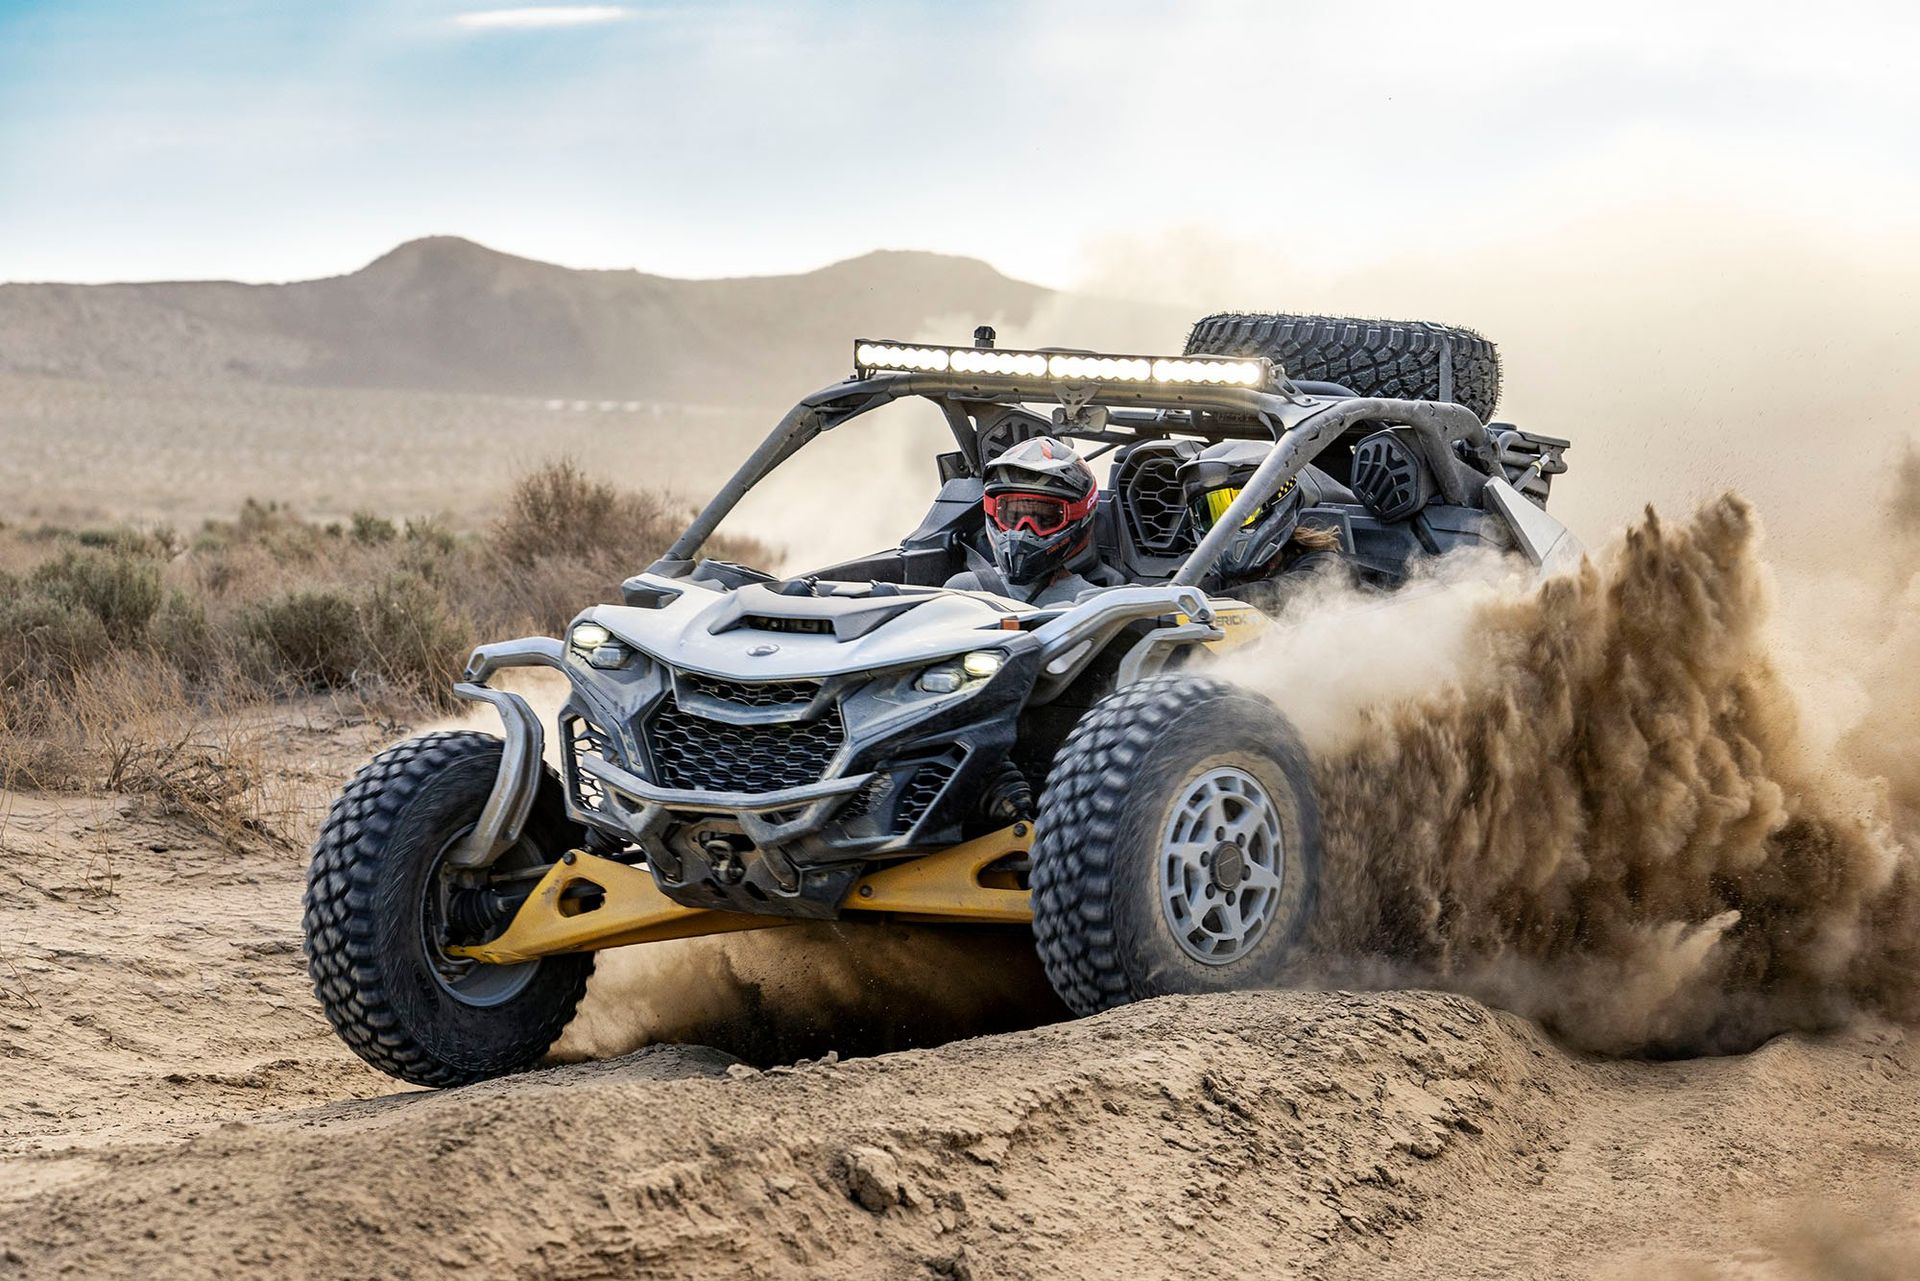 a person is riding a can-am utv on a dirt road